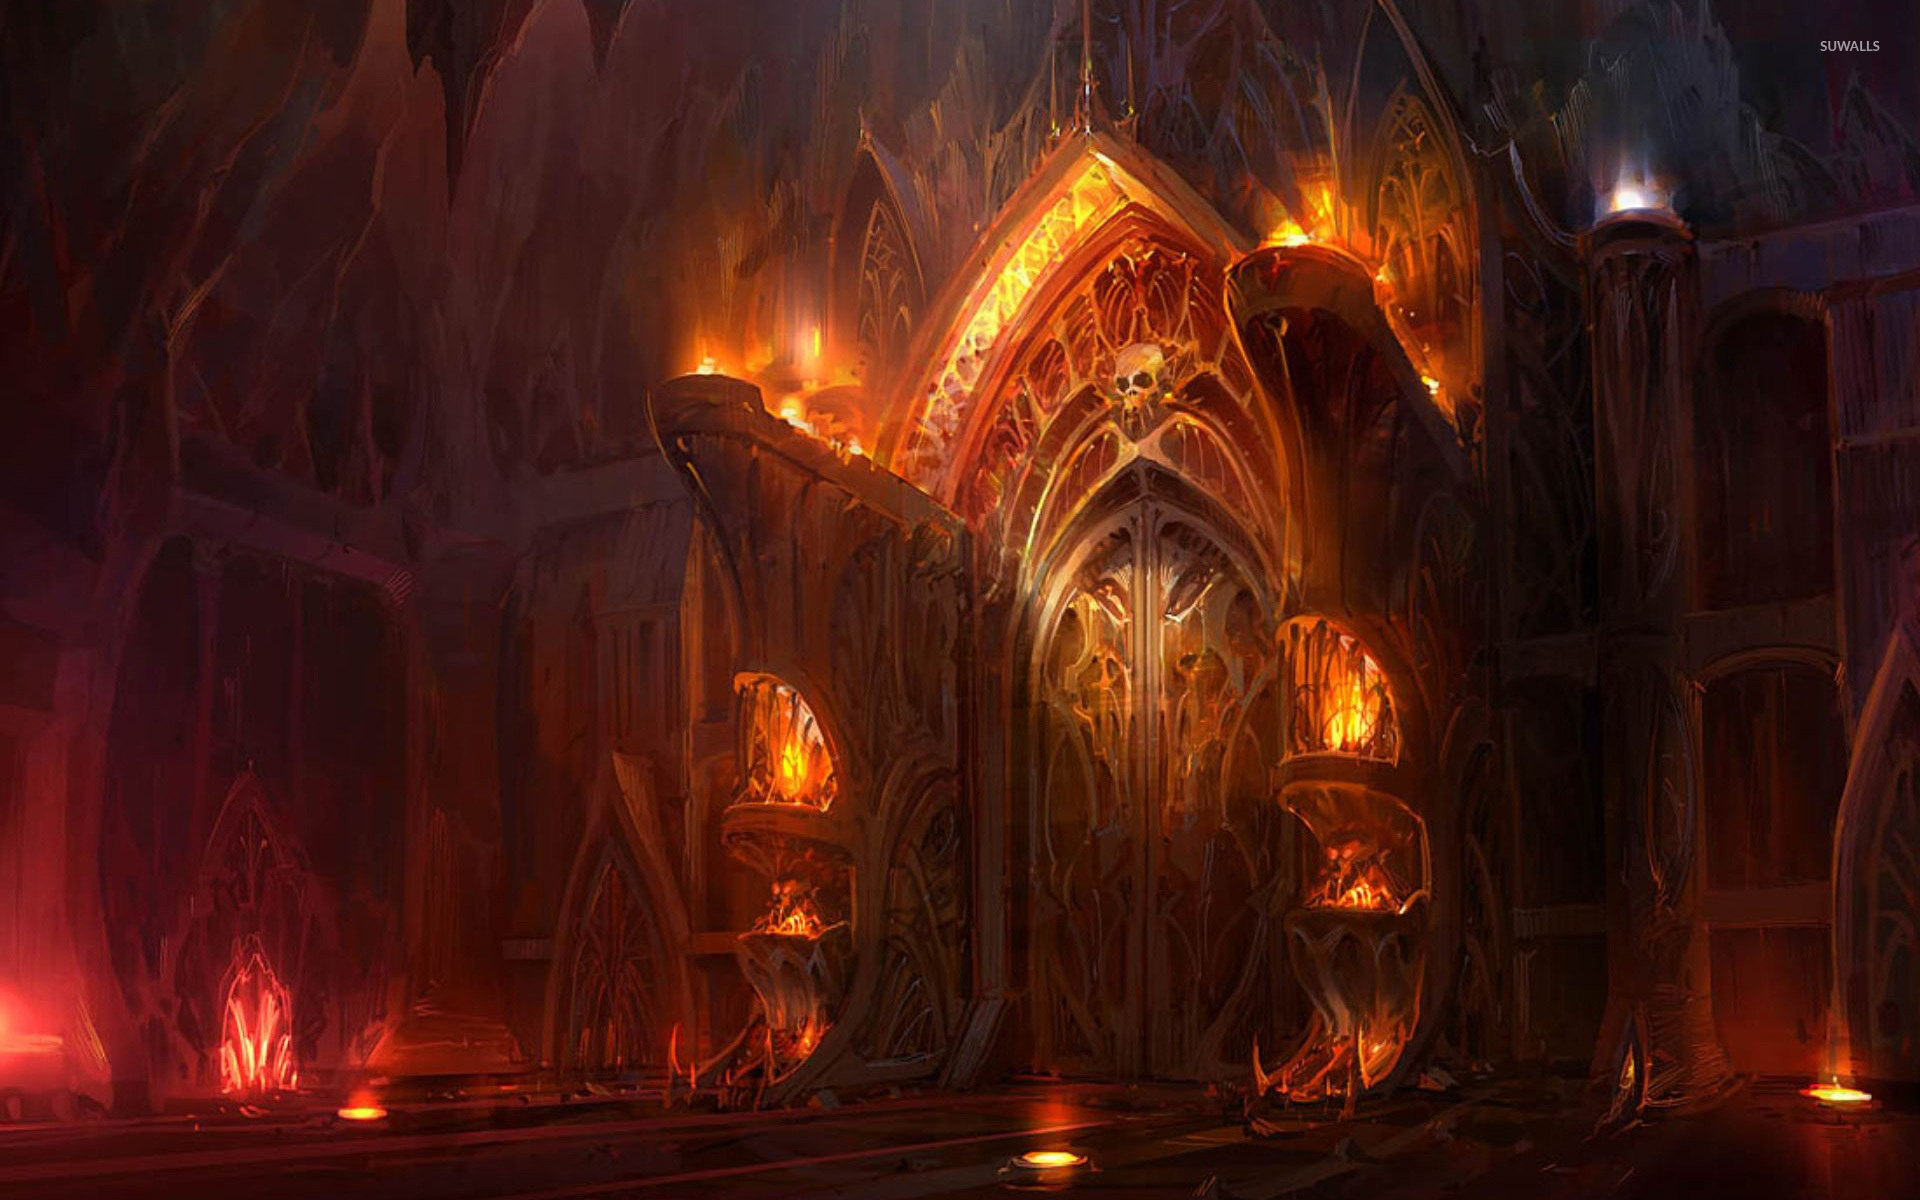 The gates of hell wallpaper   Fantasy wallpapers   8476 1920x1200